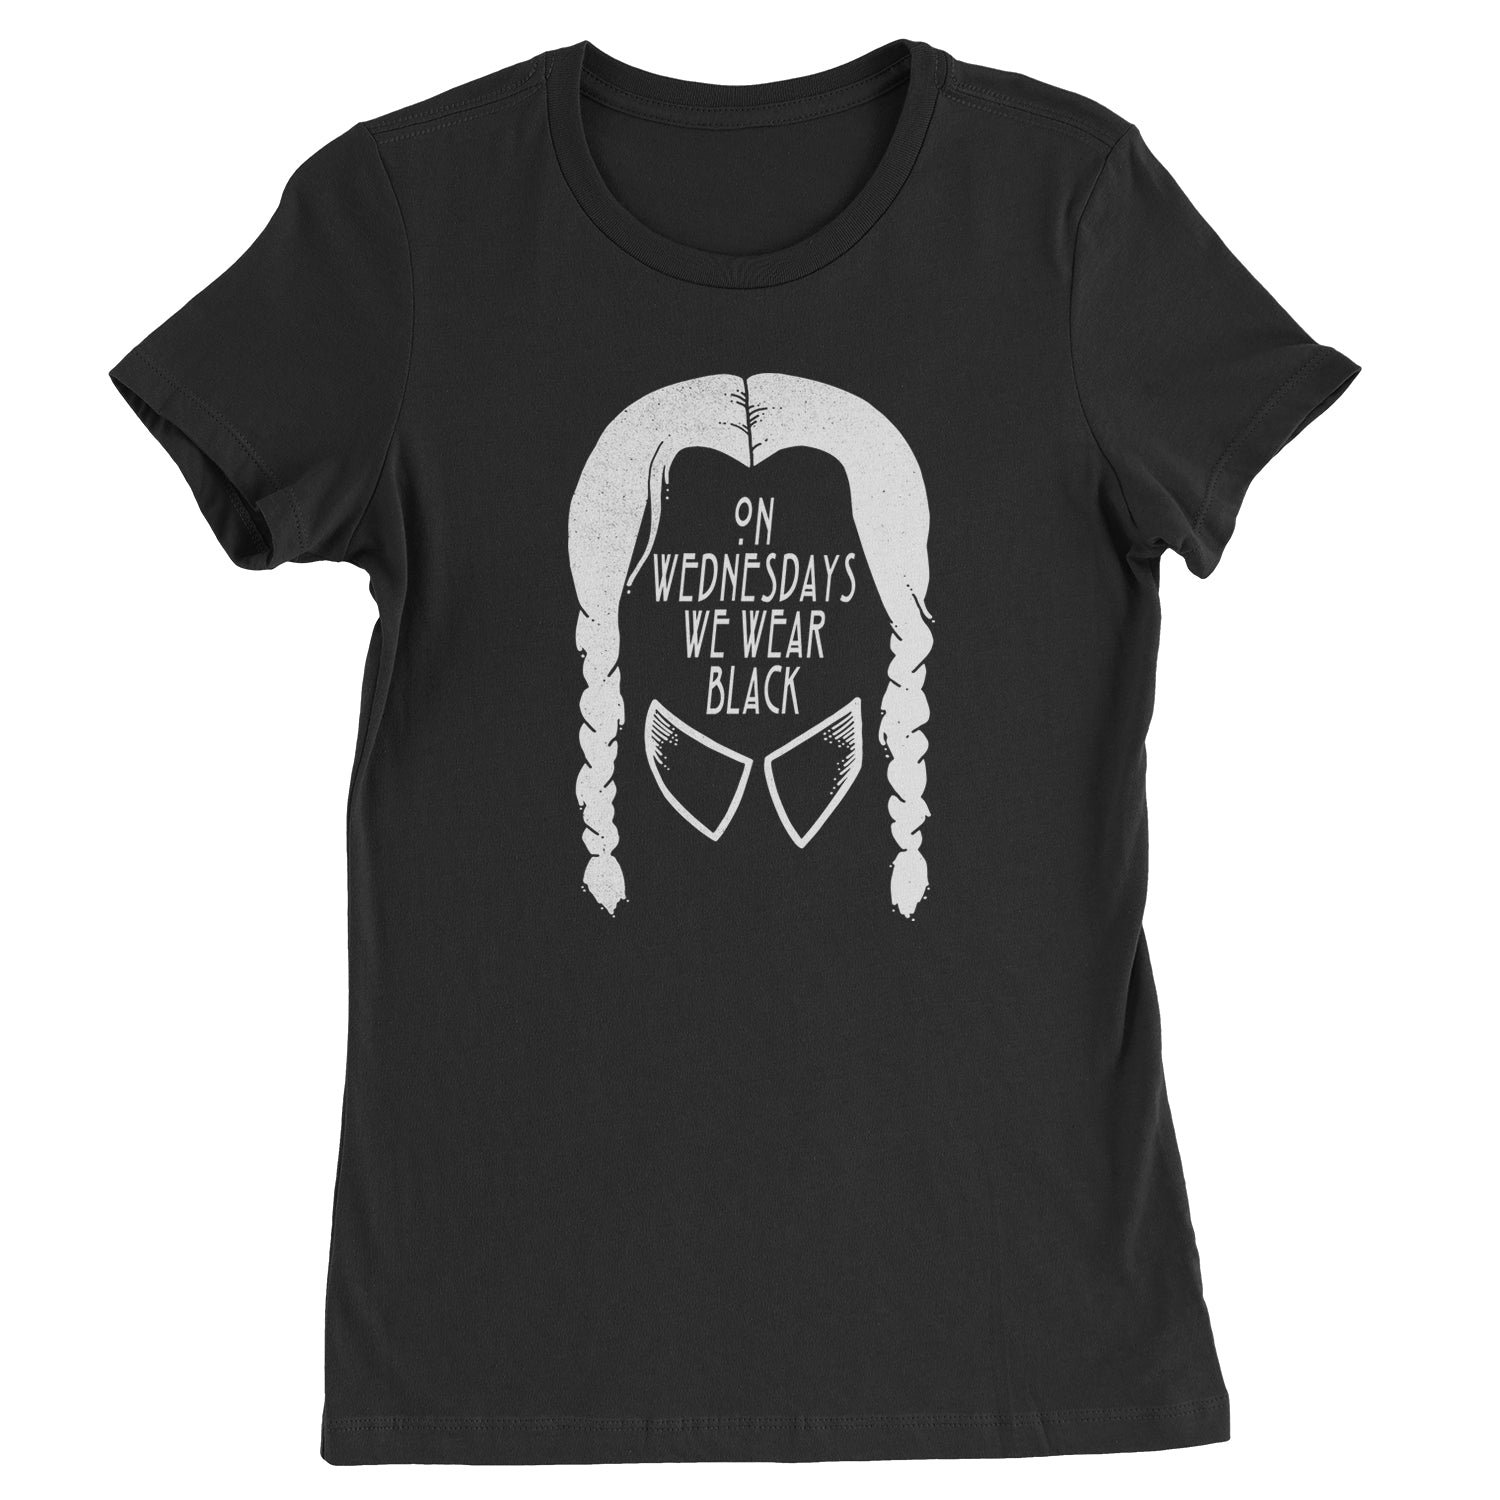 On Wednesdays, We Wear Black Womens T-shirt addams, family, gomez, morticia, pugsly, ricci, Wednesday by Expression Tees